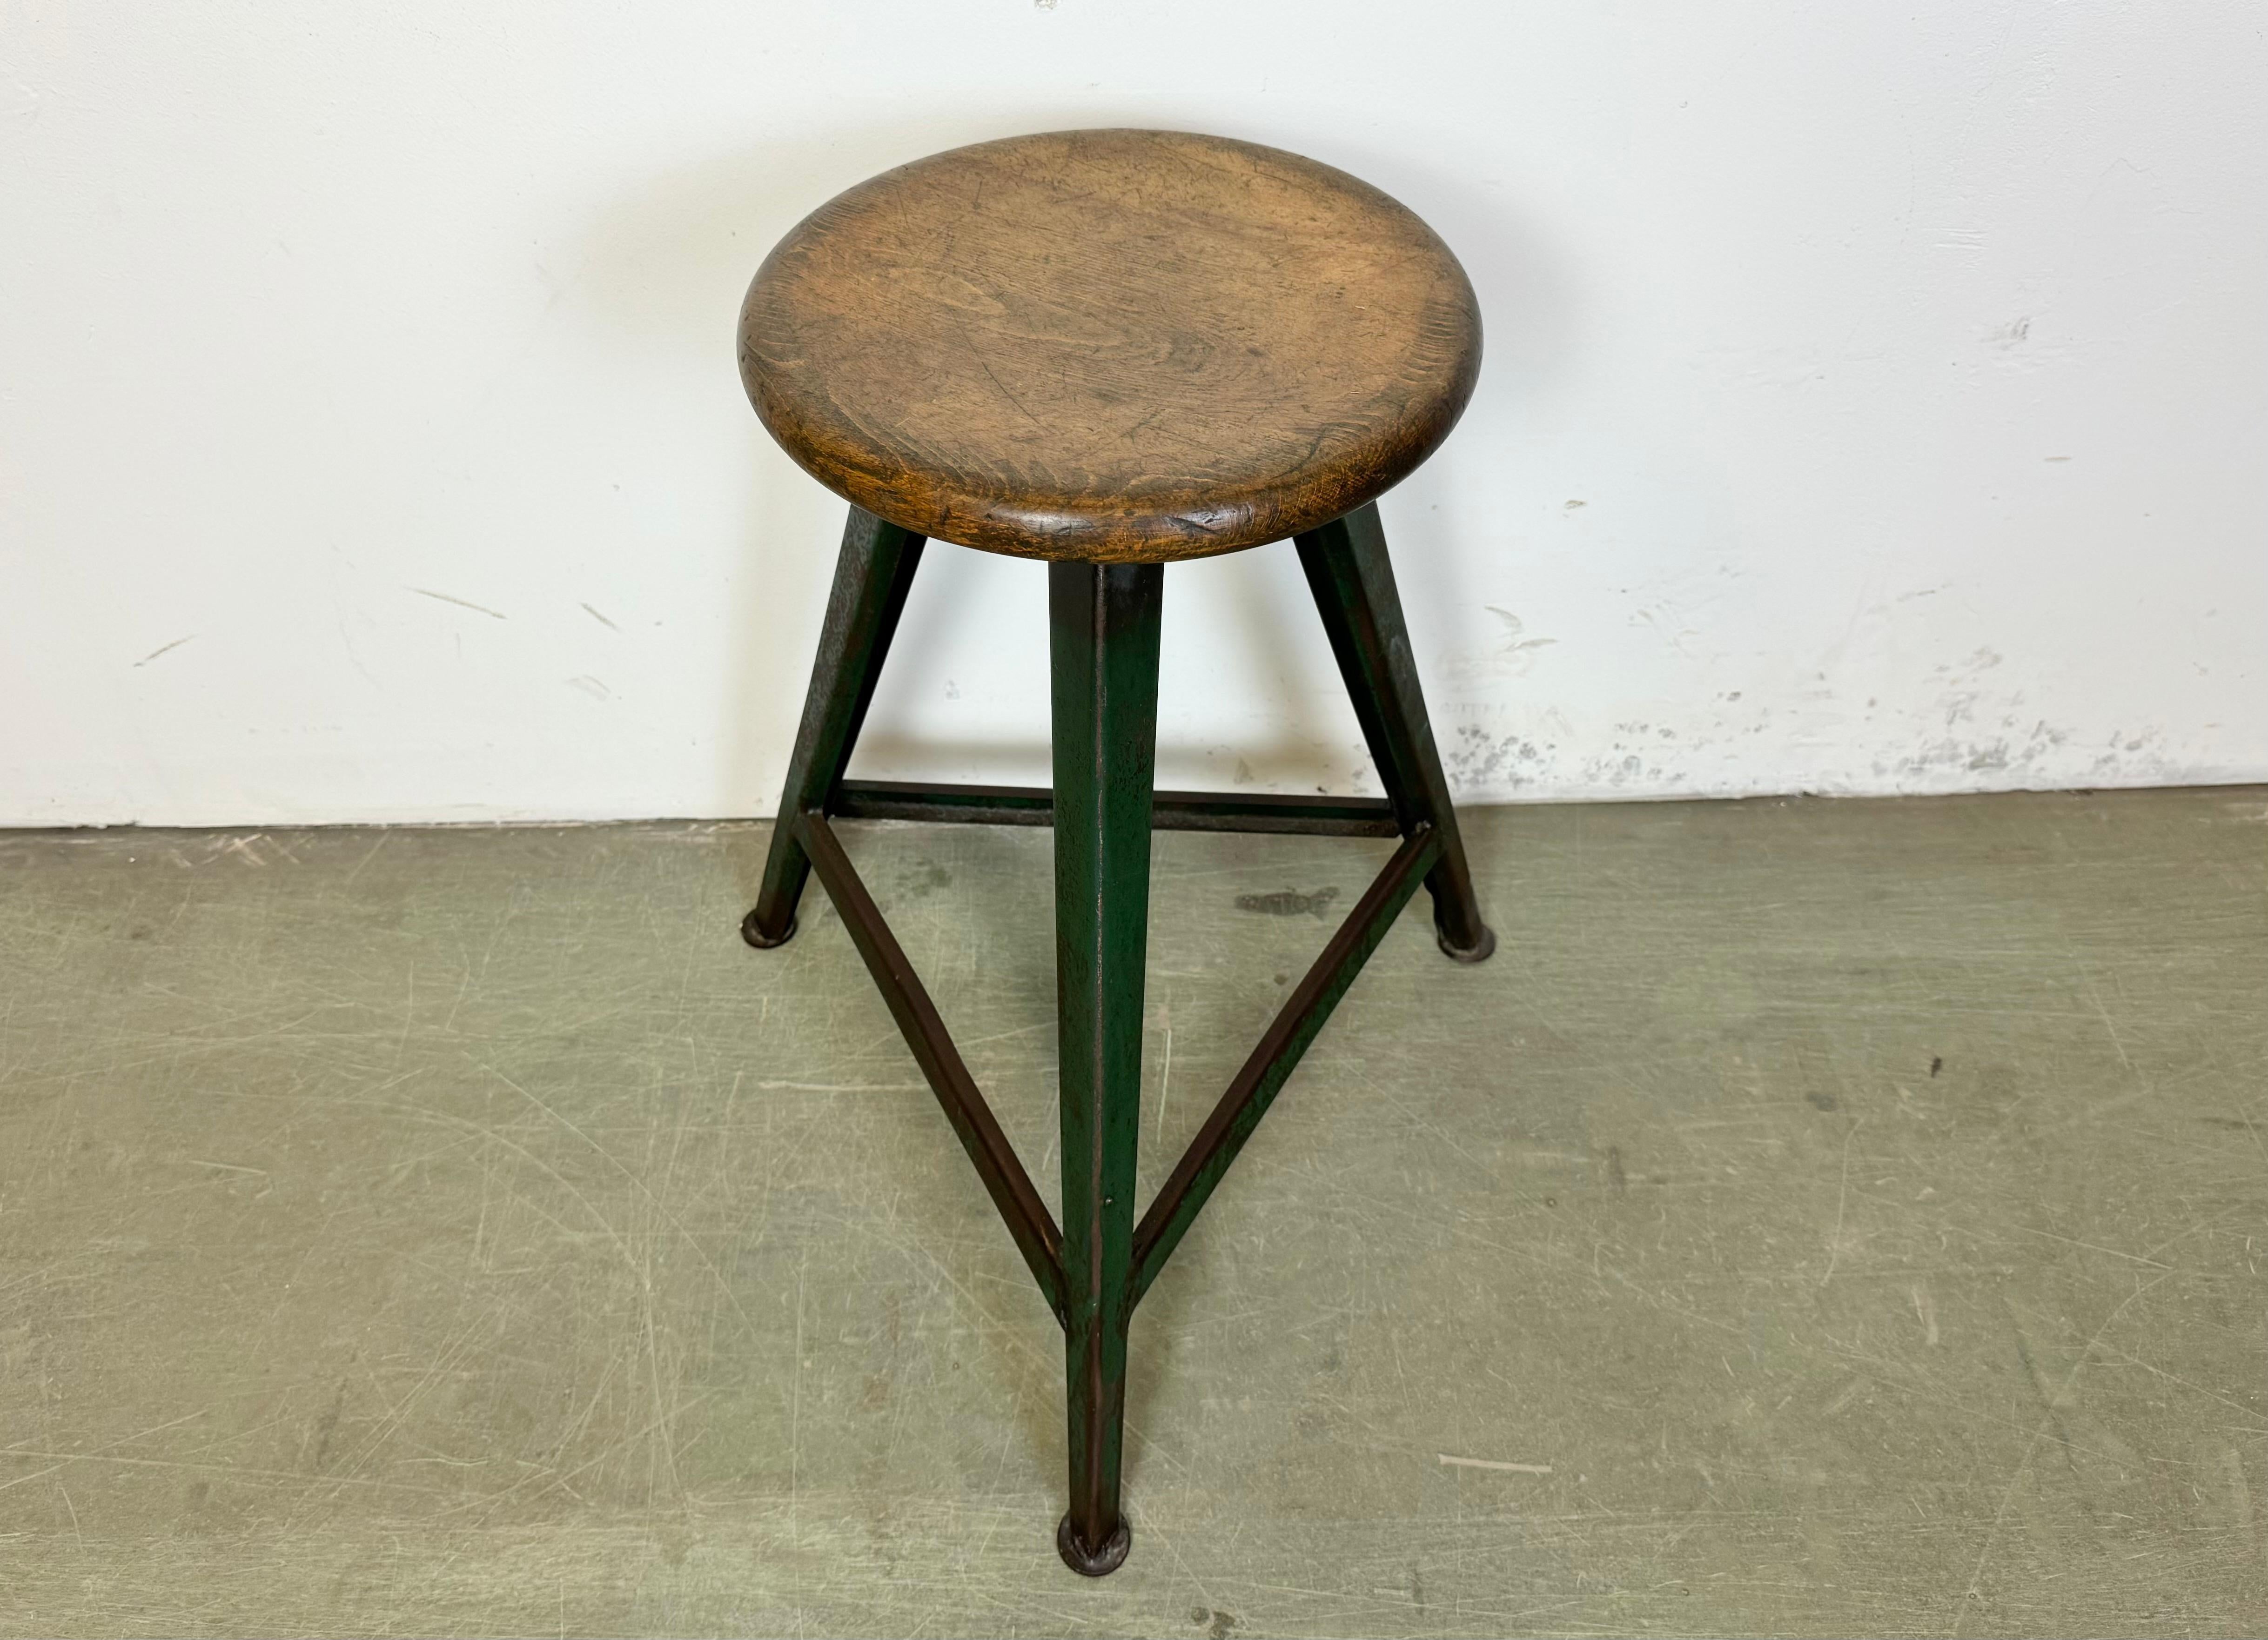 Vintage Industrial factory stool made in former Czechoslovakia during the 1960s It features a wooden seat and a green metal frame. The weight of the stool is 4,4 kg.
The diameter of the seat is 32 cm.